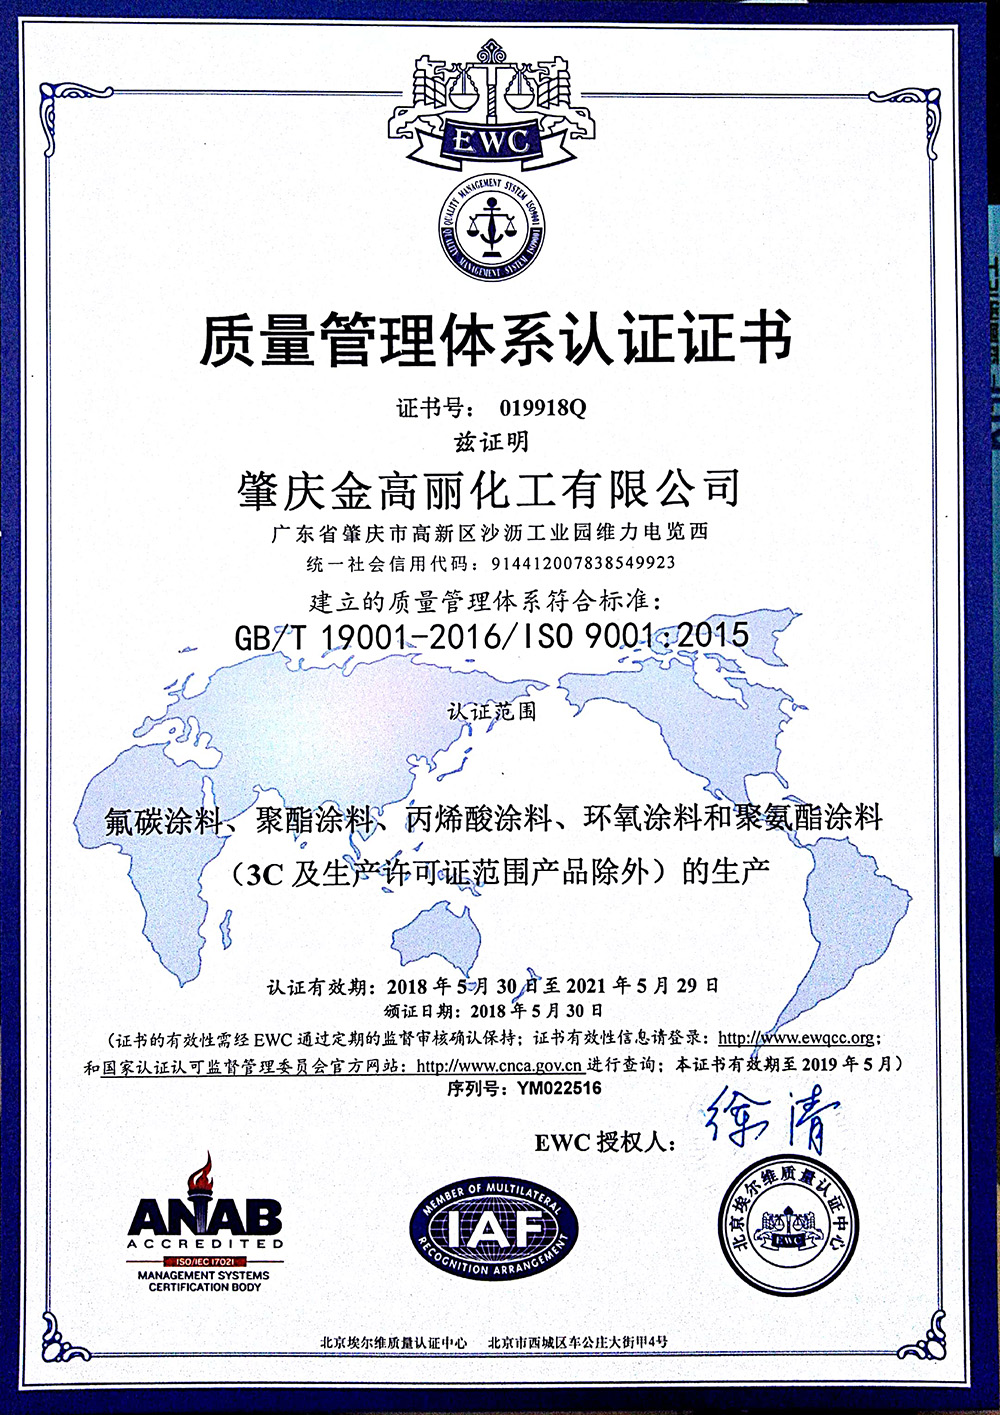 Zhaoqing KGE - Quality Management System Certification (18-21)